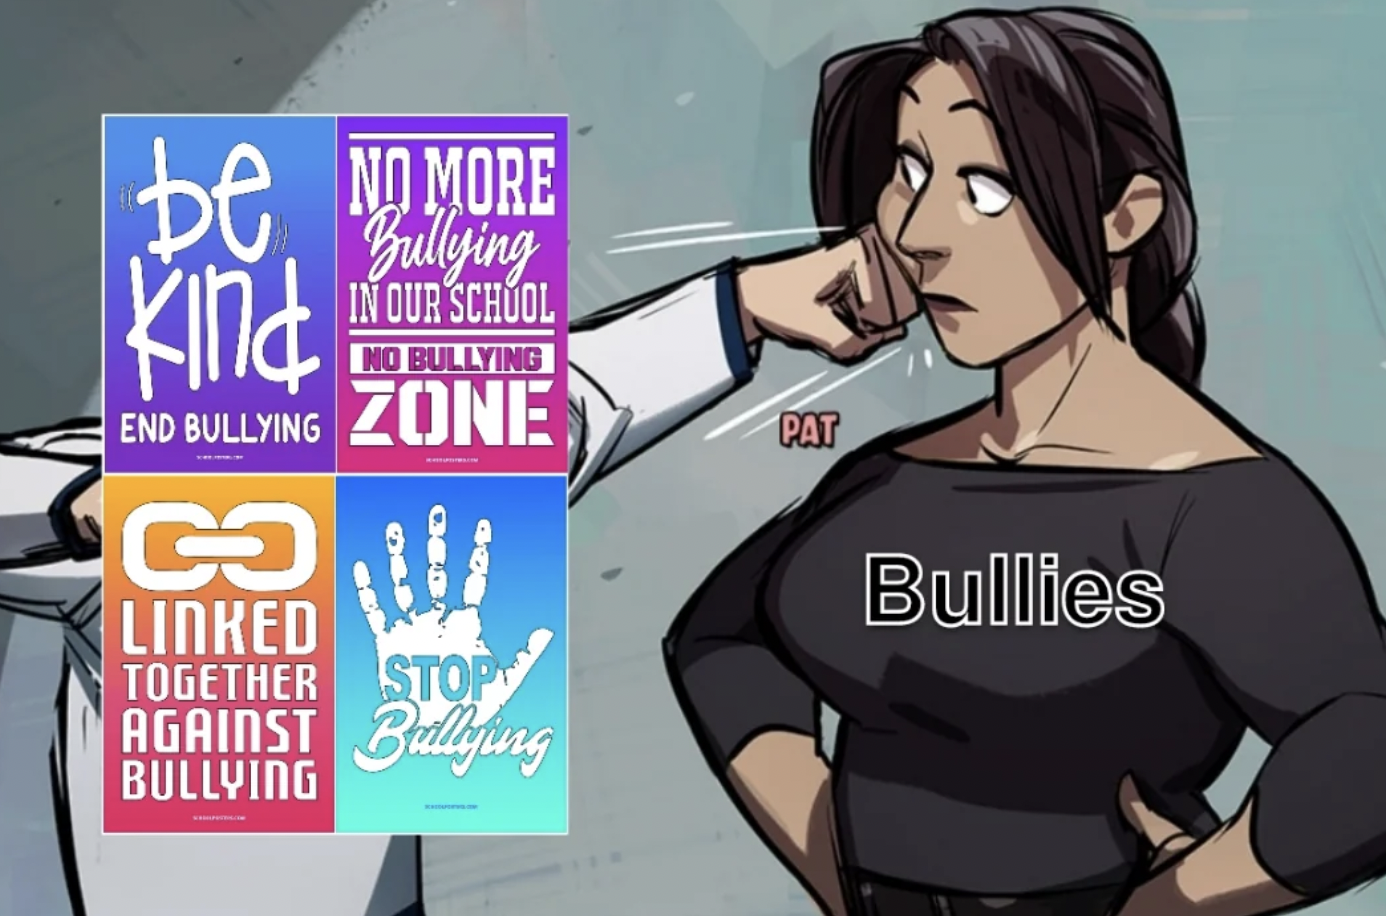 tf2 comic zhanna - be kind No Bullying End Bullying Zone No More Bullying In Our School Co Linked Together Stop Against Bullying Bullying 343 Goe Pat Bullies